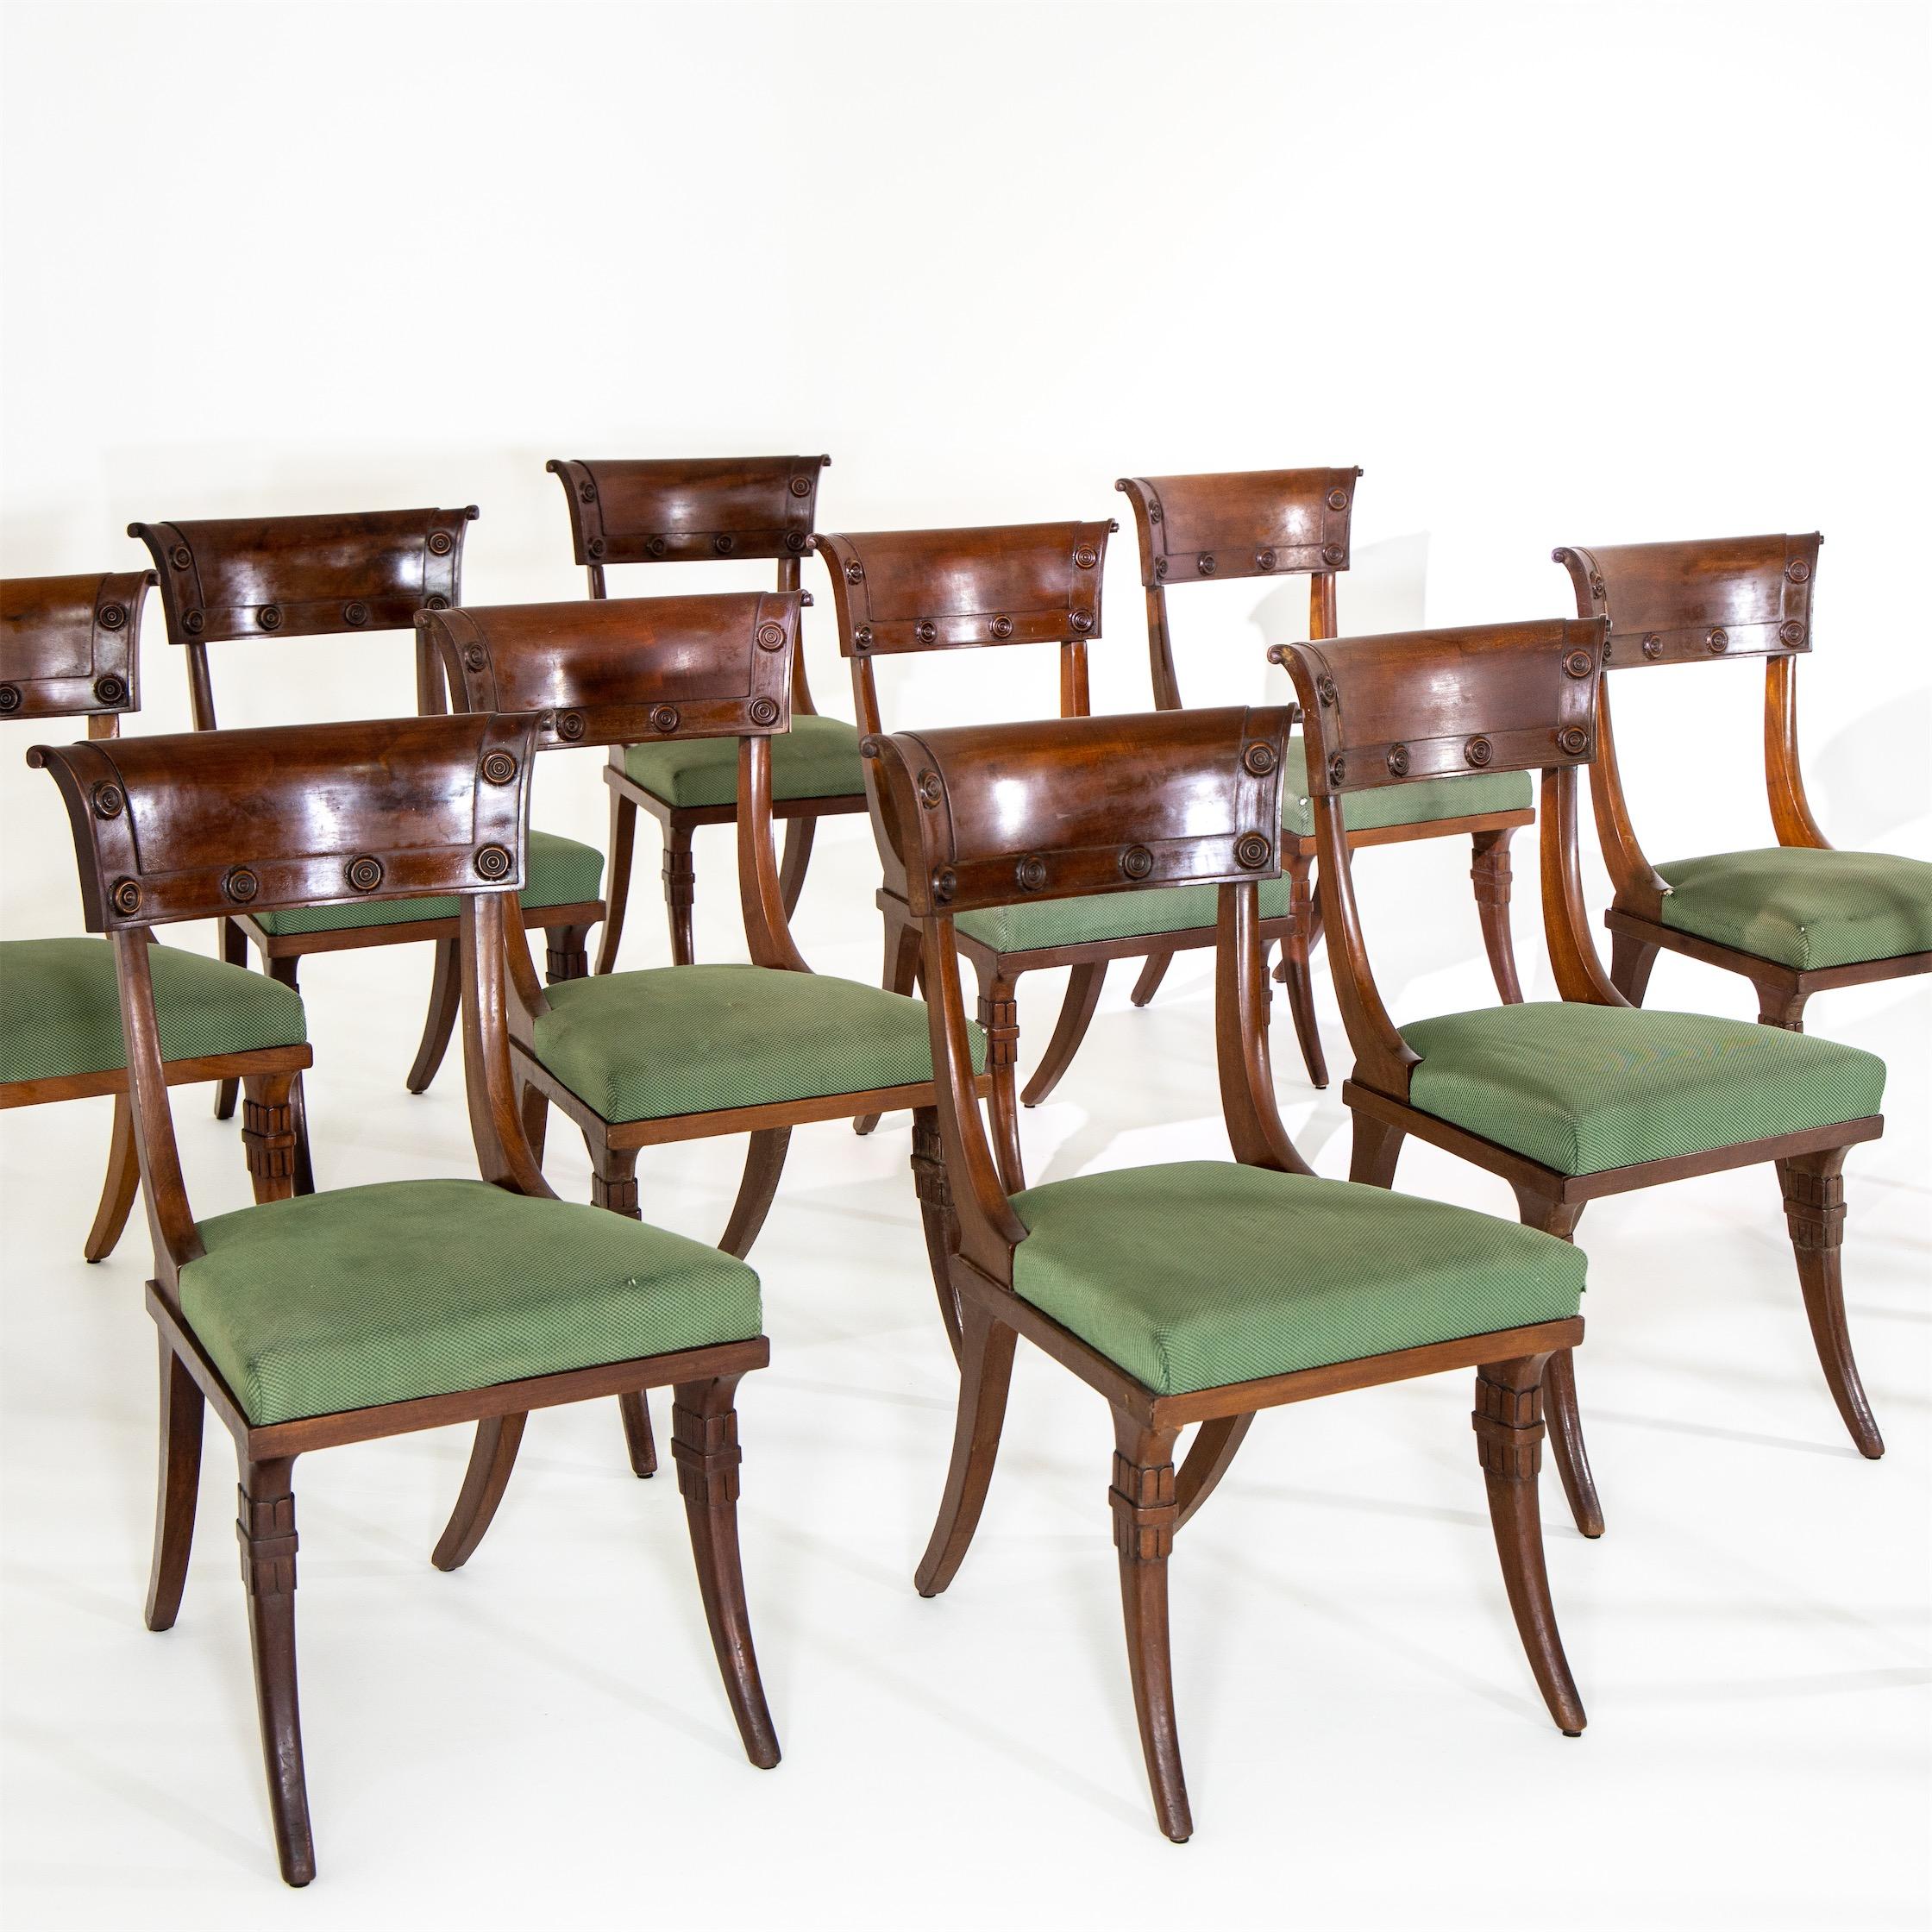 French Directoire Klismos Chairs, France, 19h Century